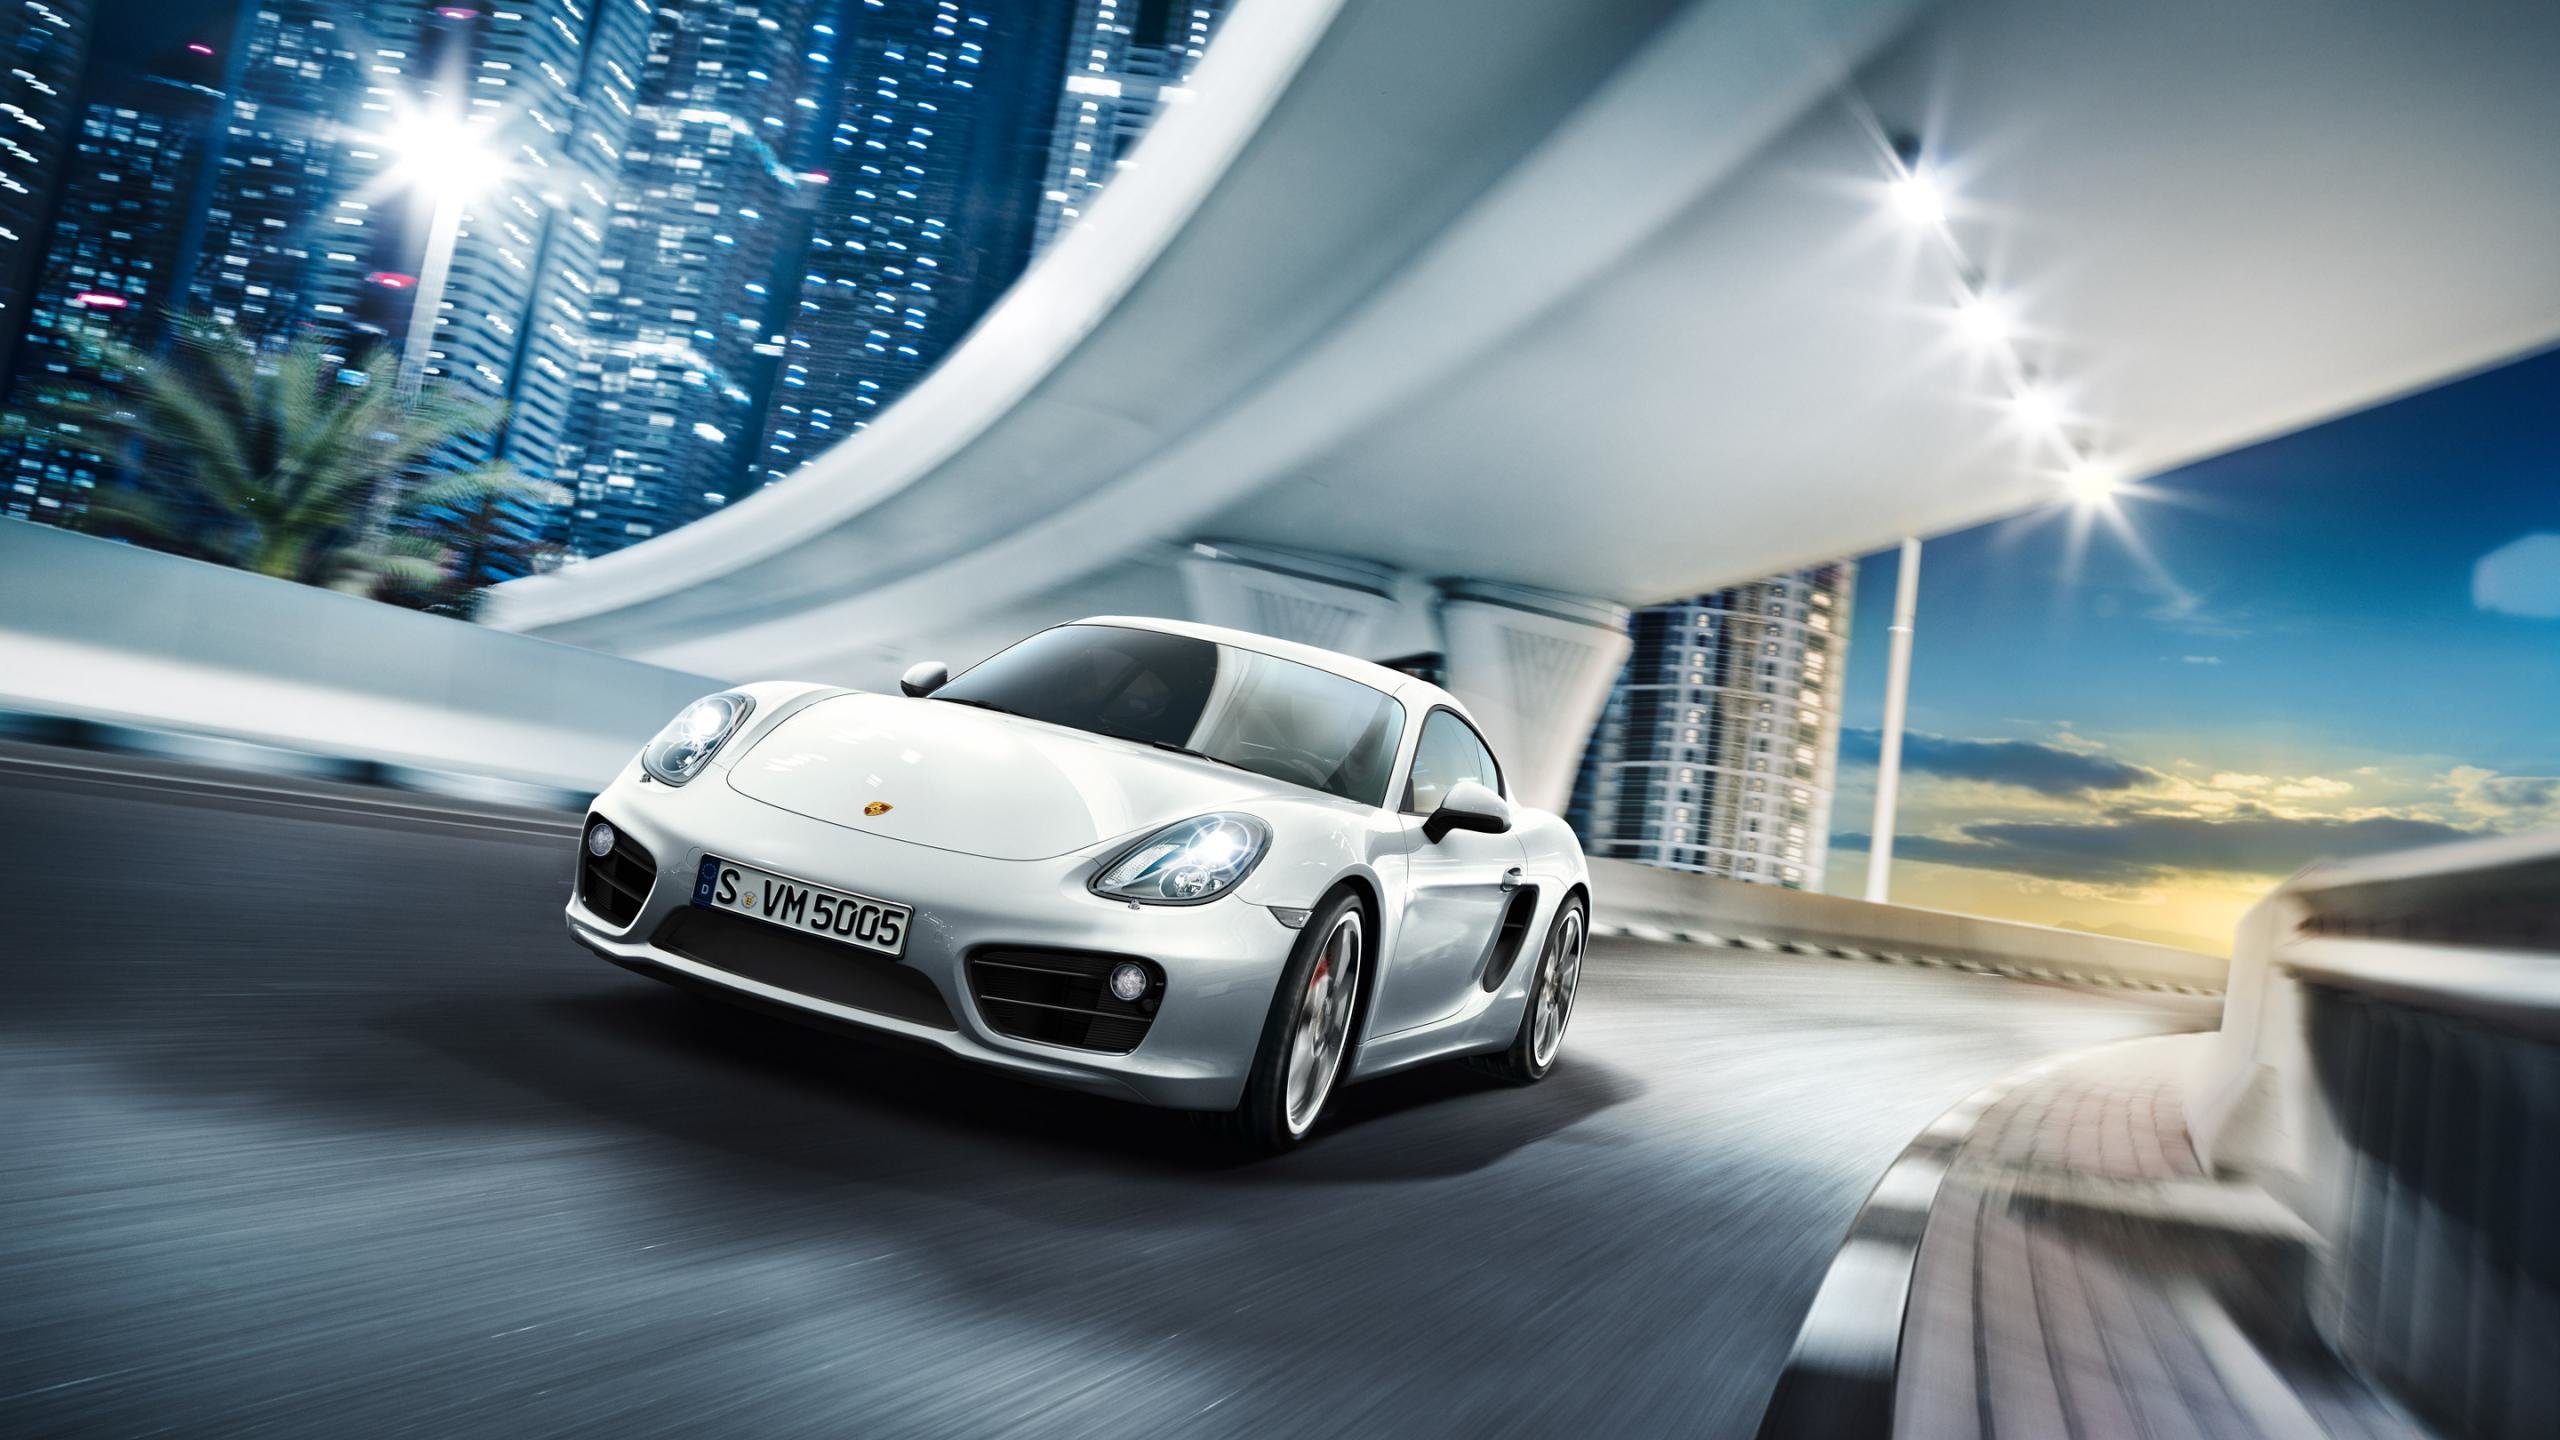 Download hd 2560x1440 Porsche Cayman S PC background ID:365884 for free